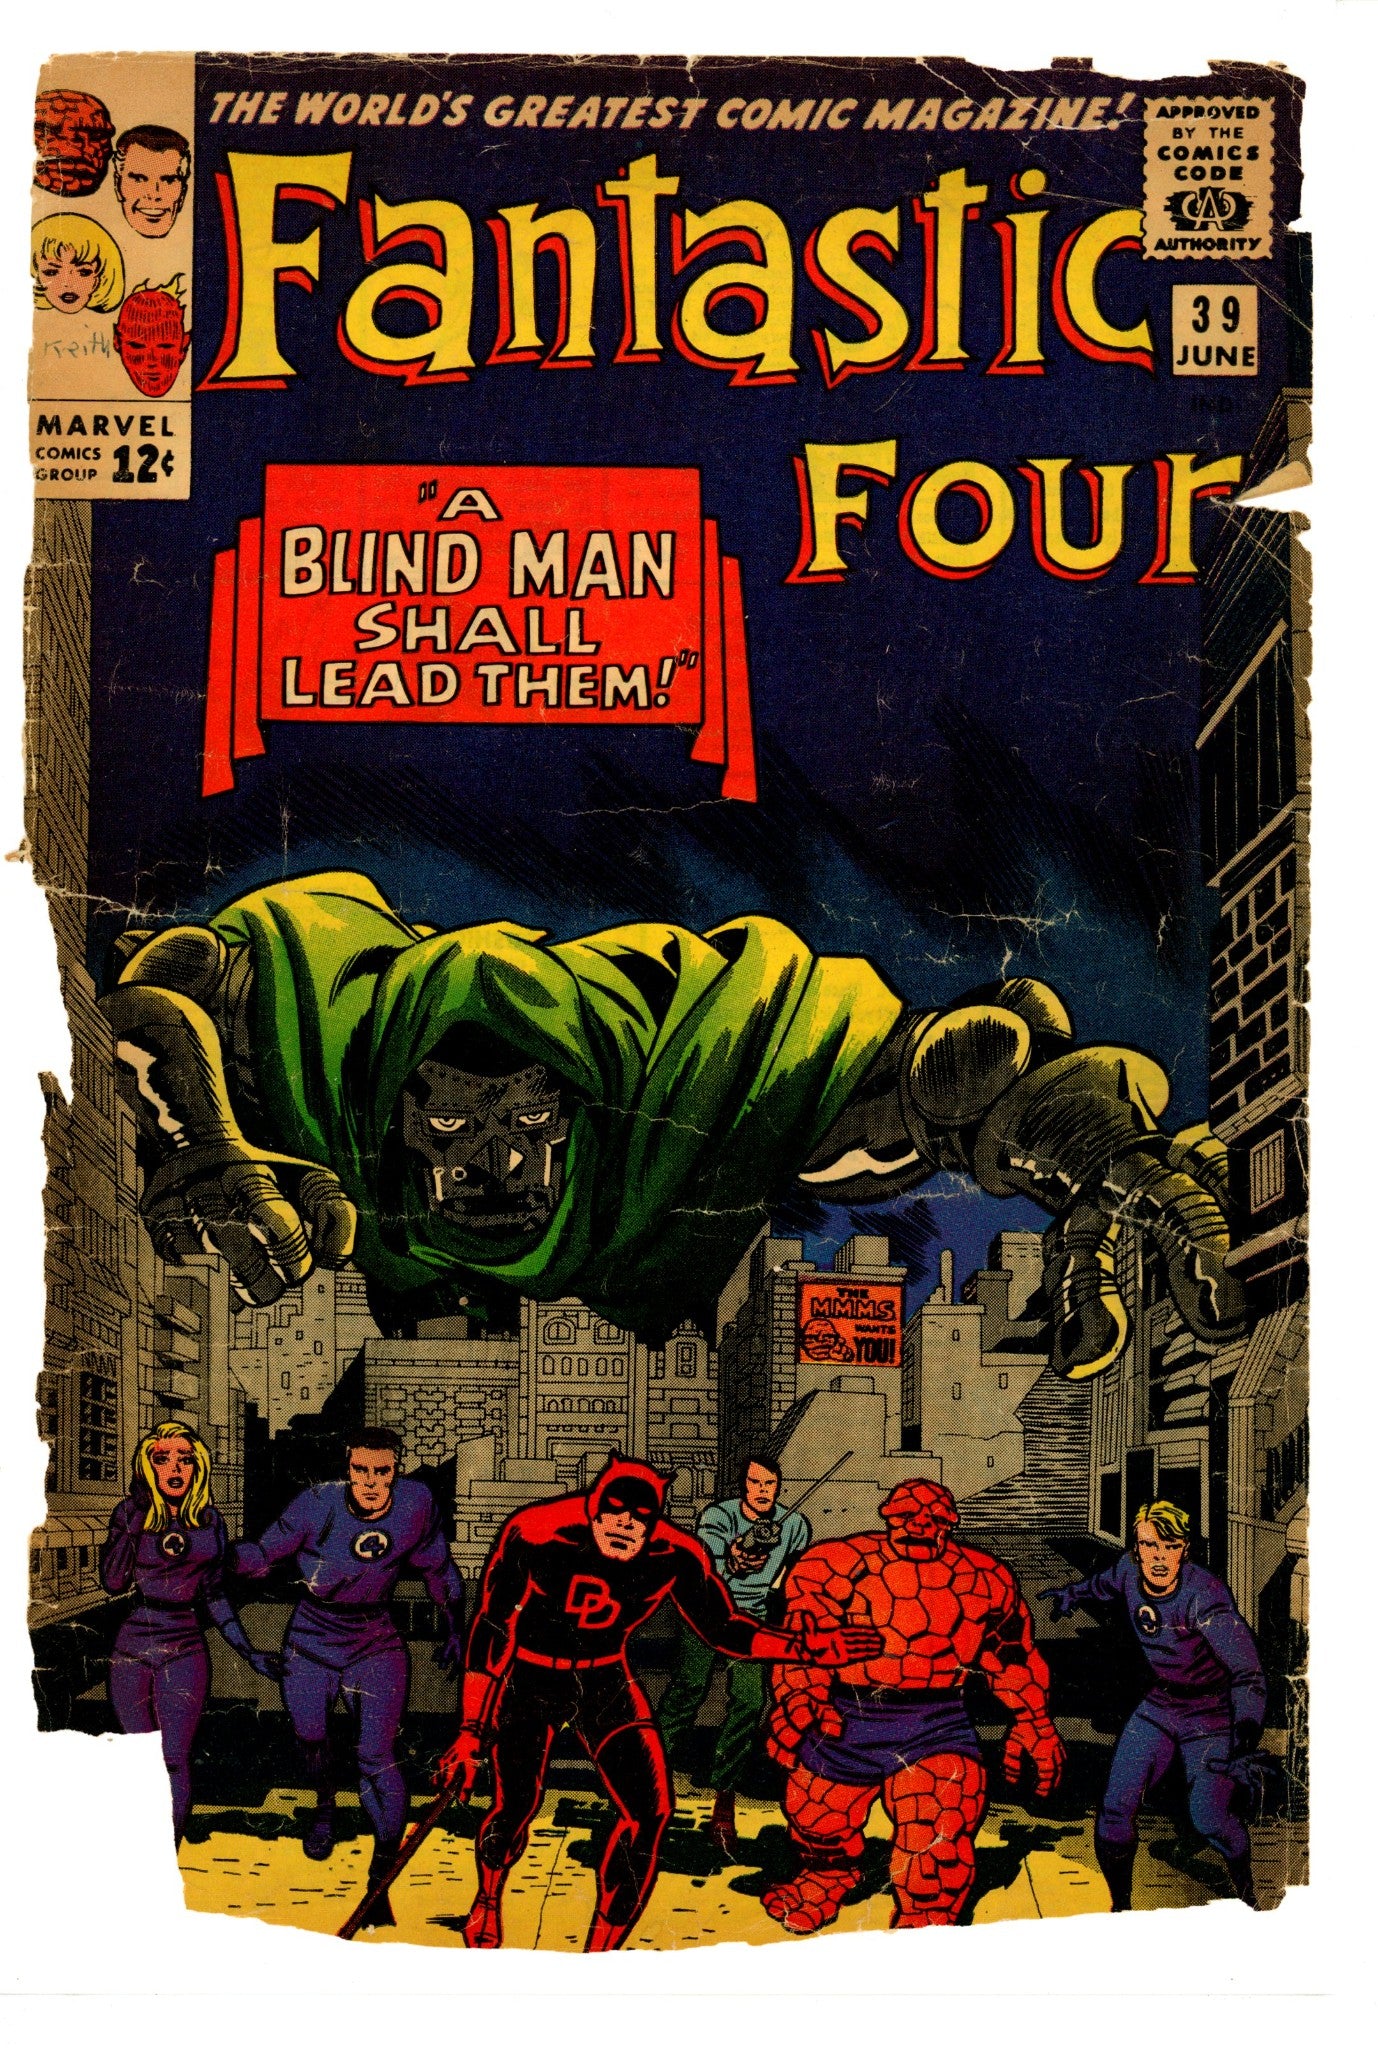 Fantastic Four Vol 1 39 Front Cover Only (1965) 